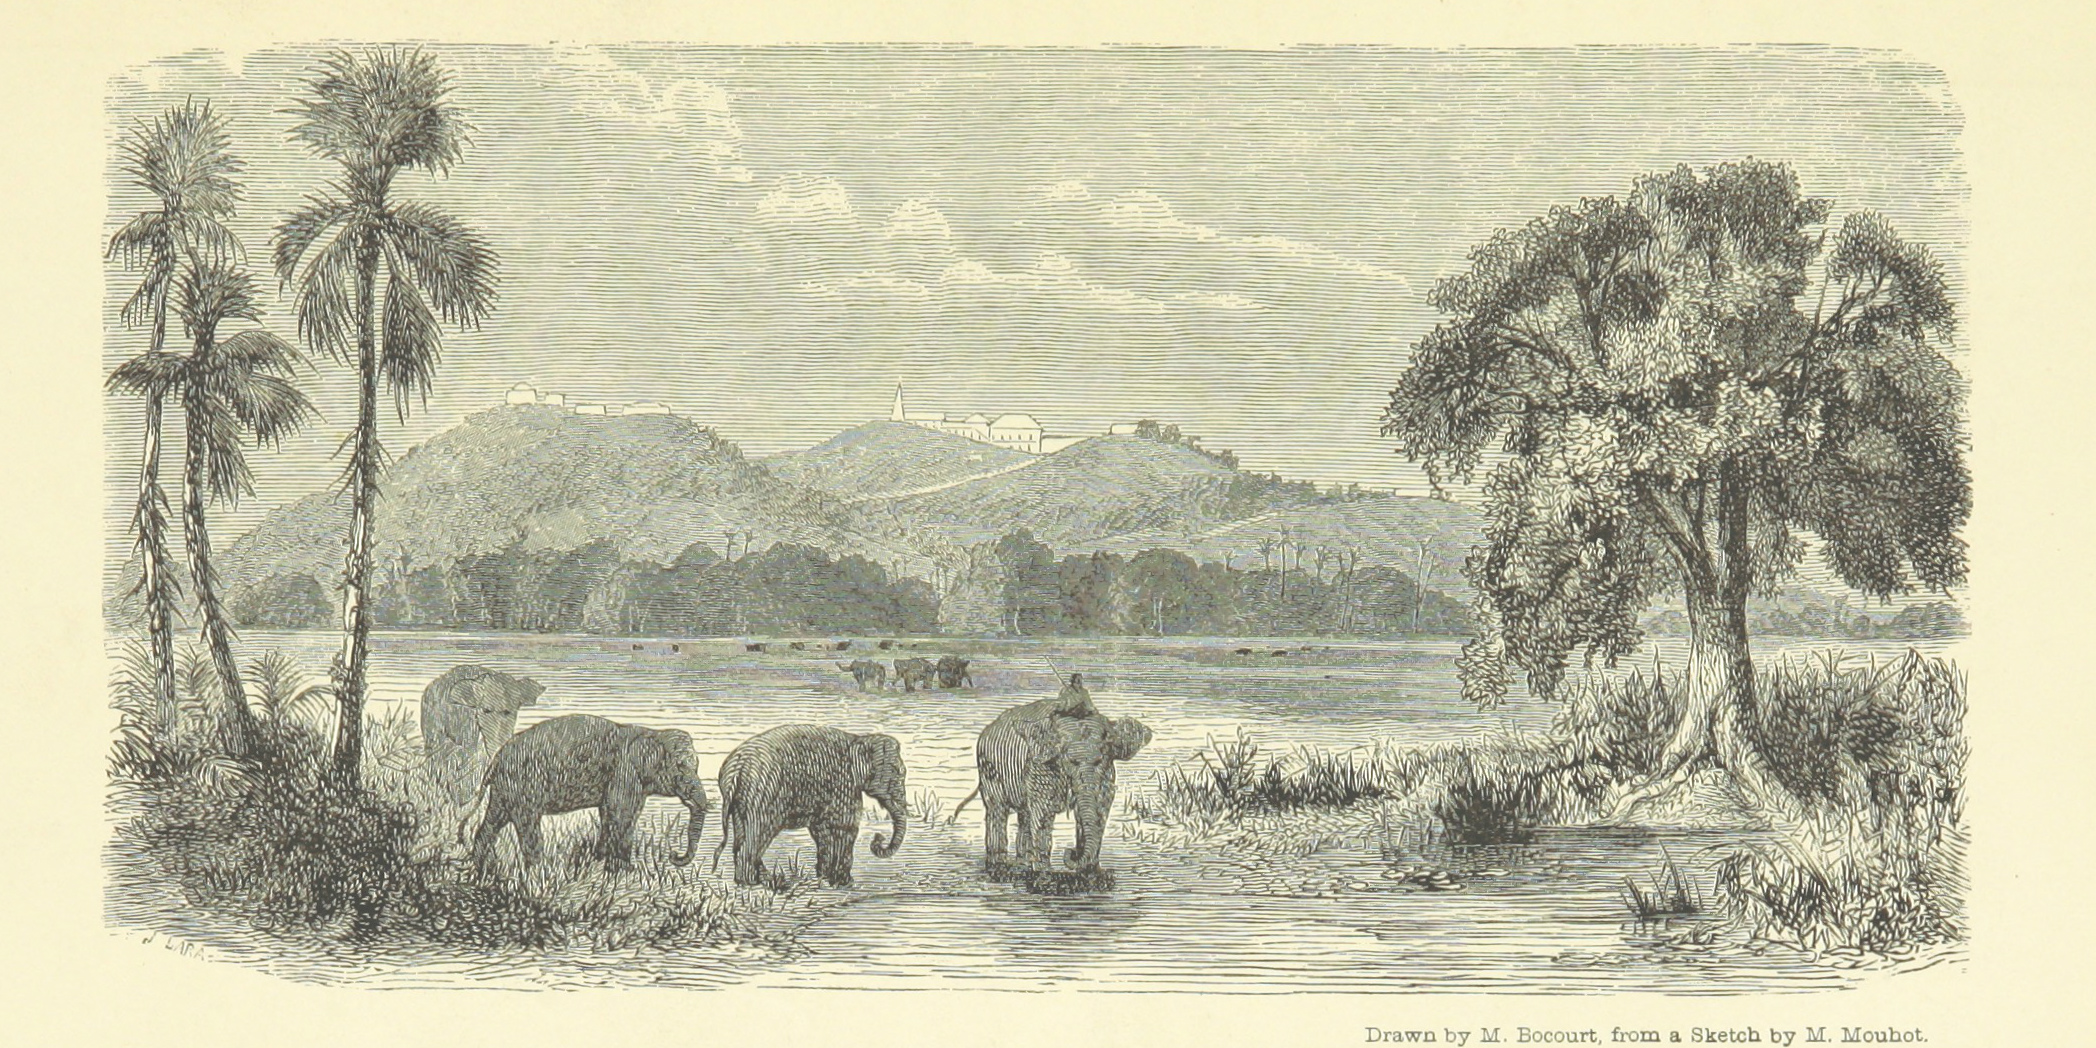 An illustration of elephants in Thailand in the 19th century. There is a rider on the back of the first elephant. 